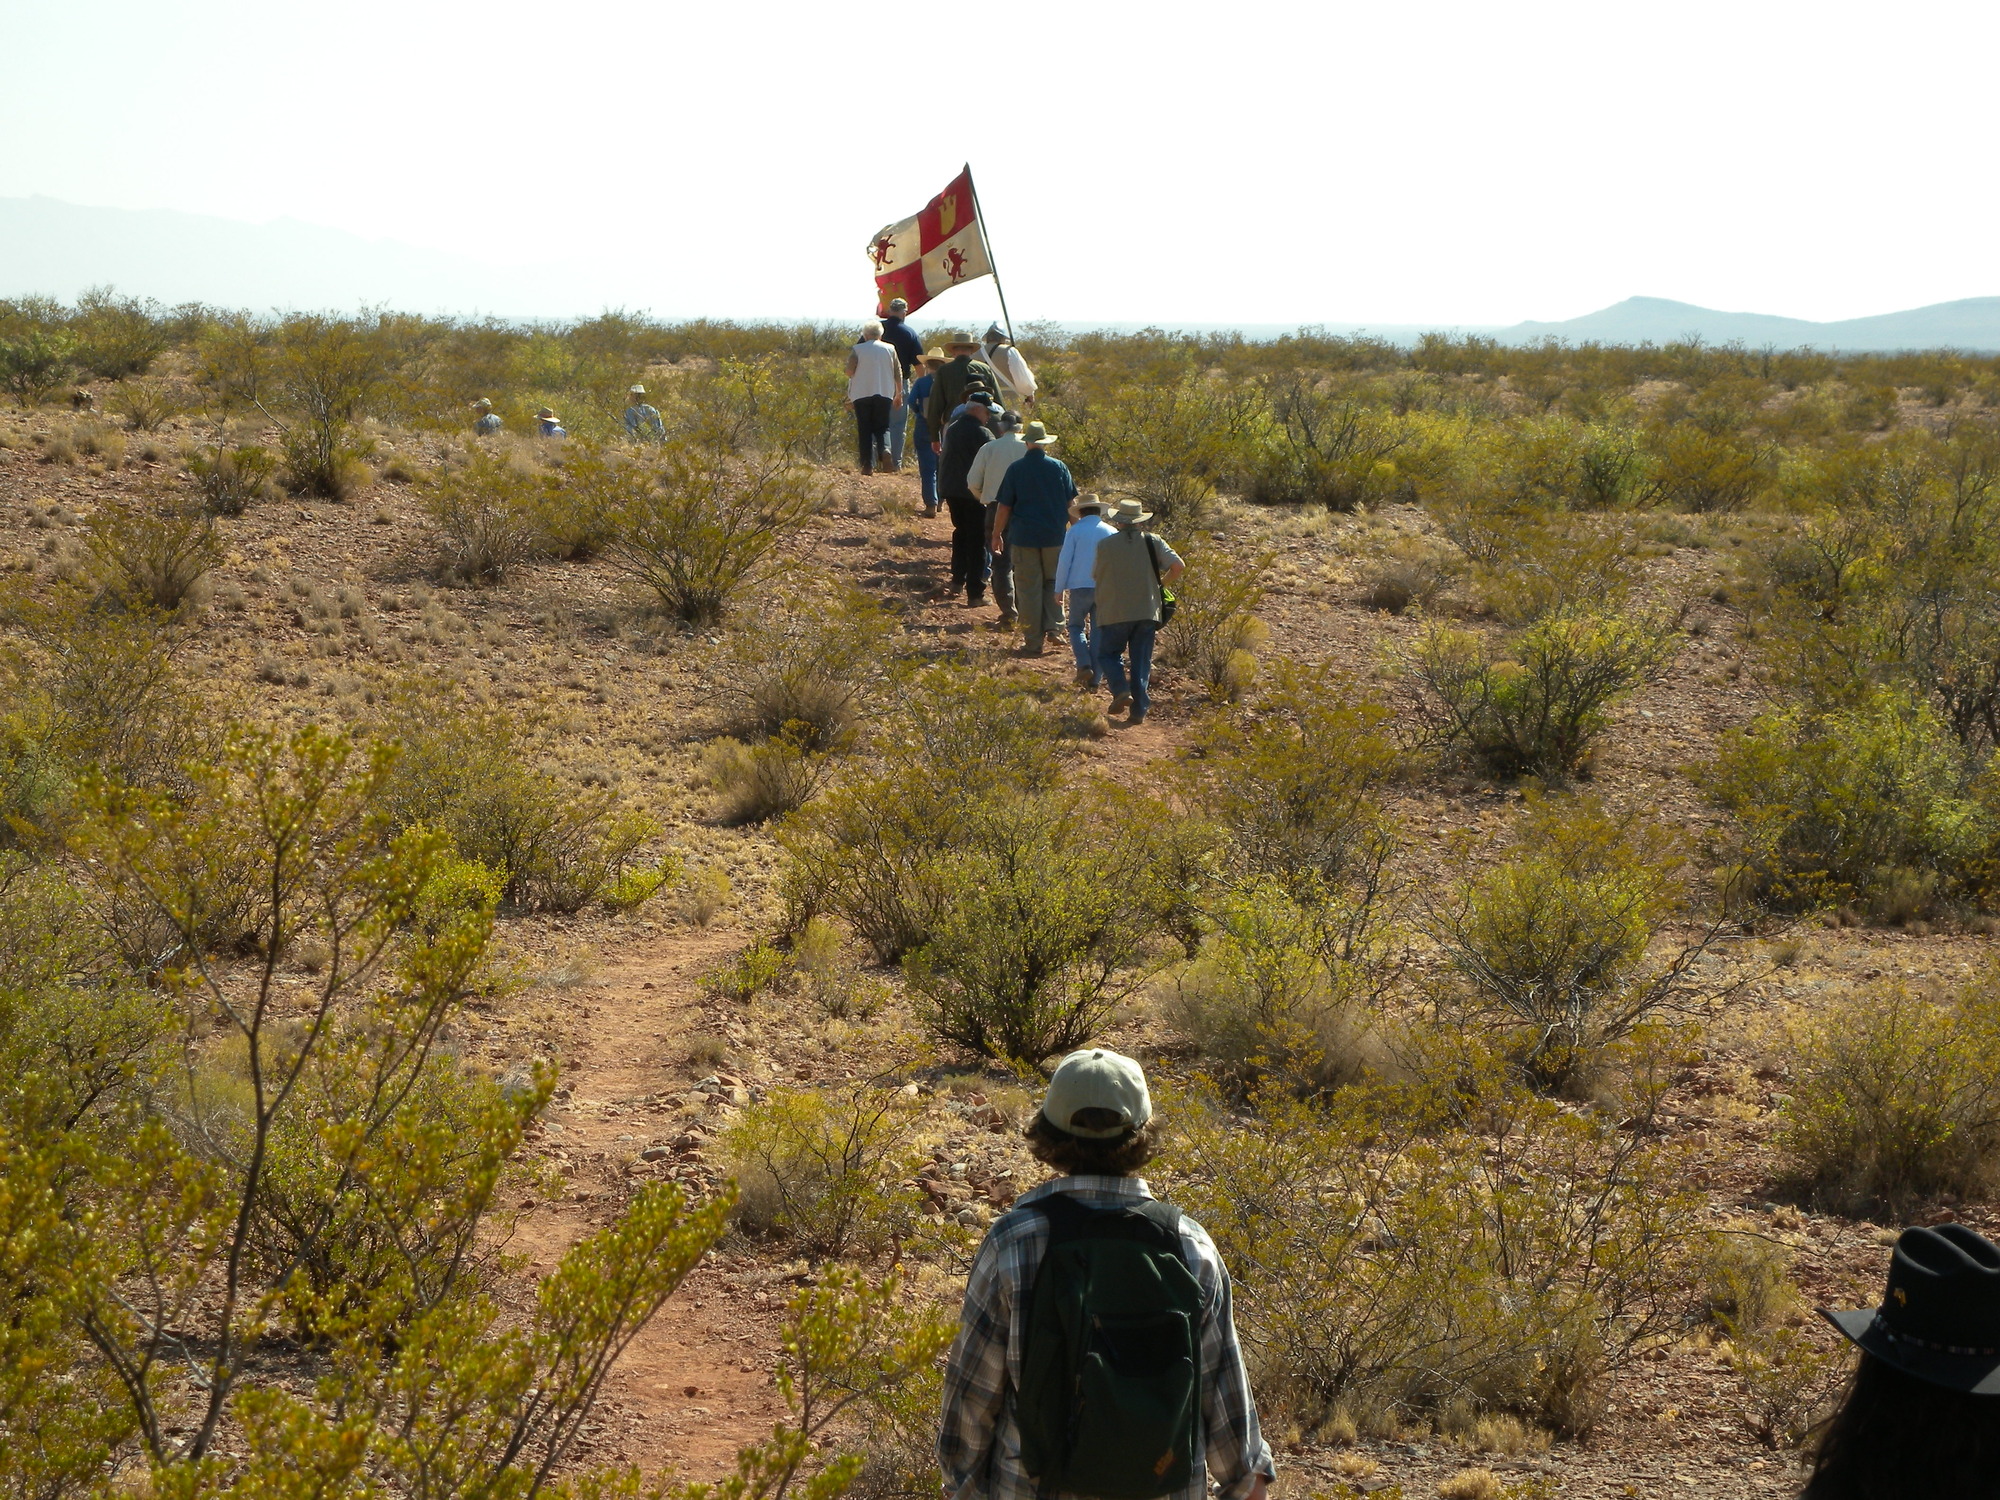 A group takes part in a Spanish reenactment march at the Yost Draw in the Jornada del Muerto Trail in Sierra County, NM